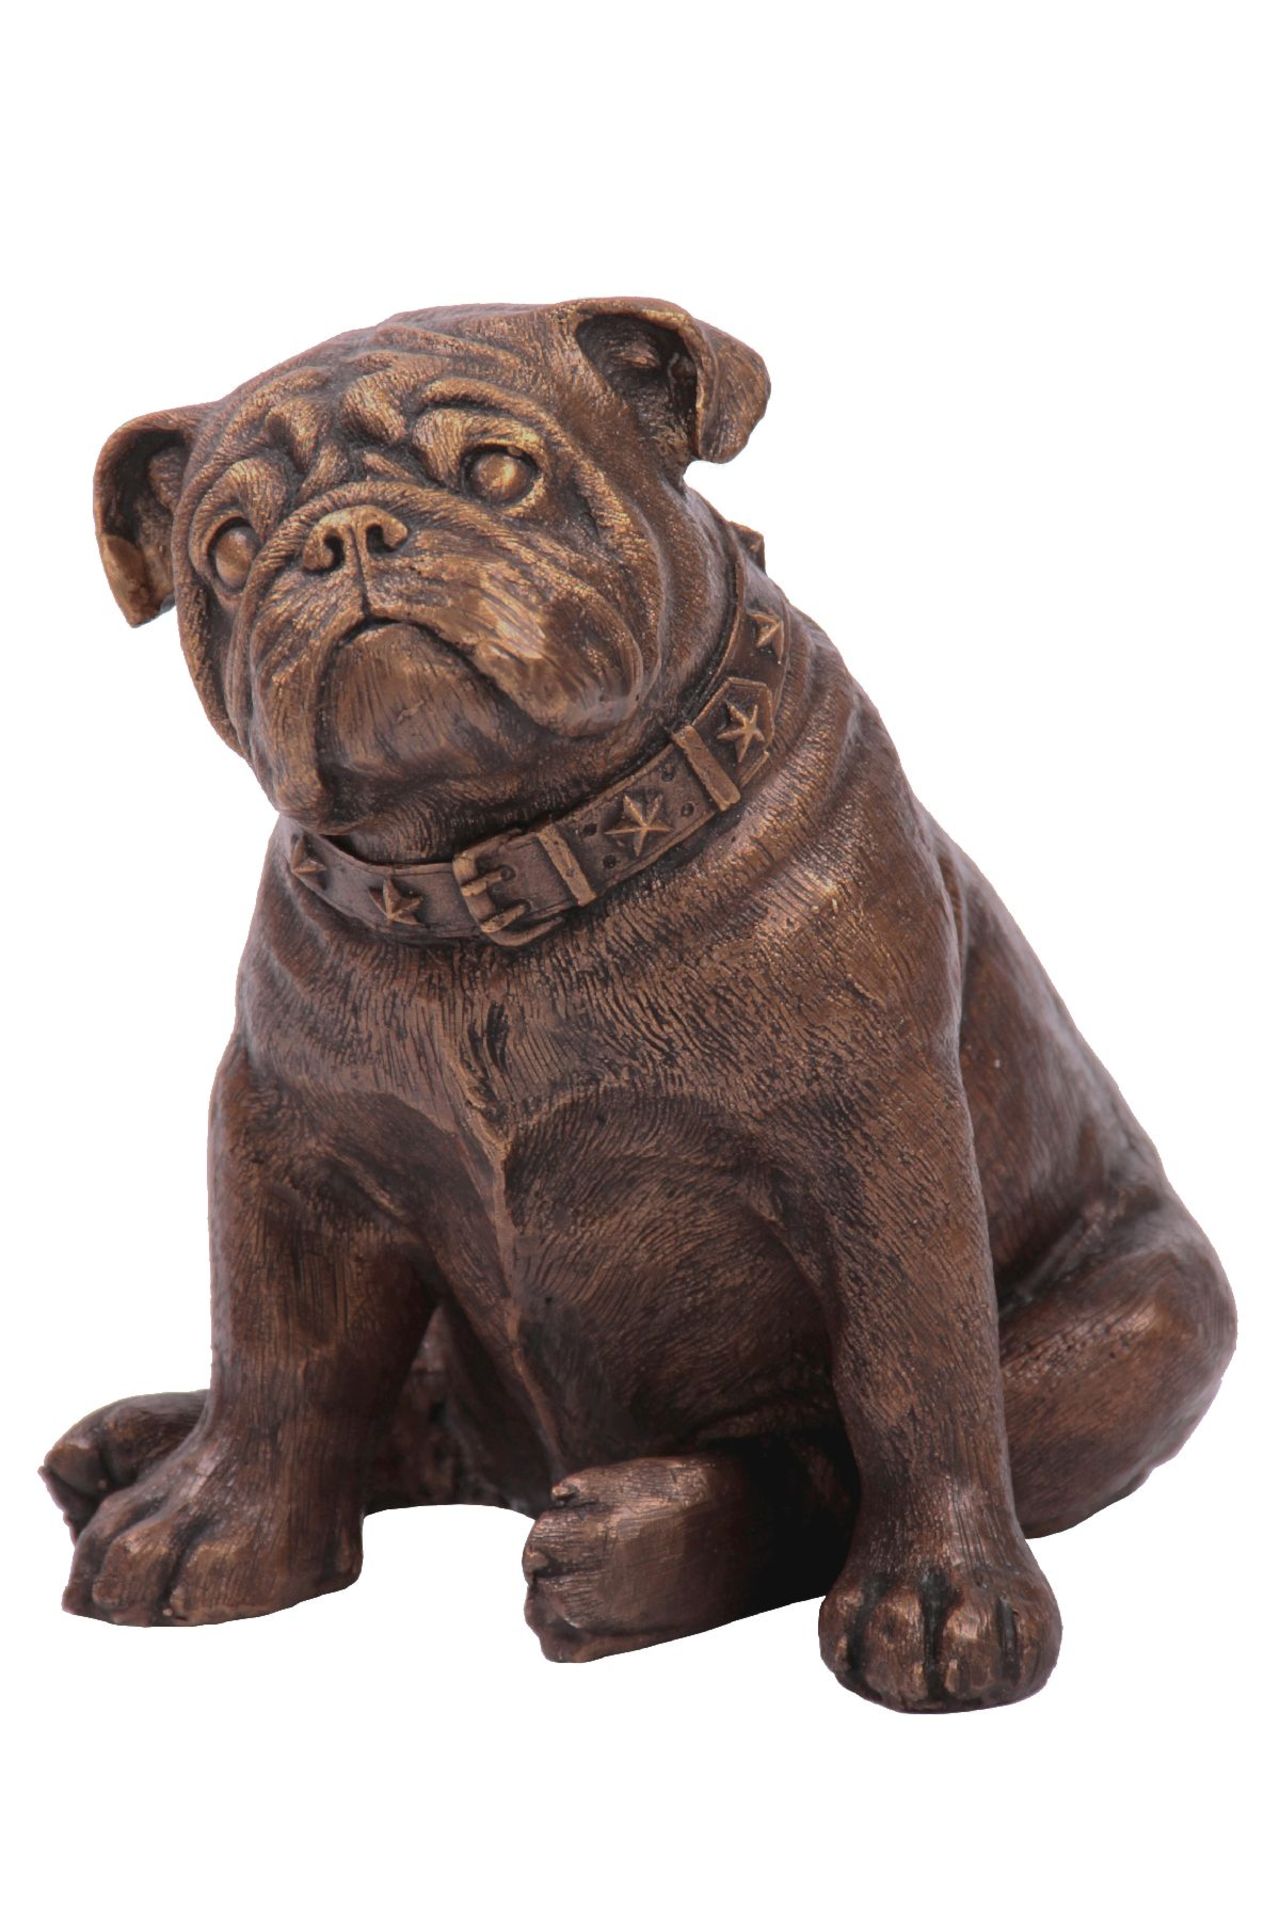 Bulldog, after French Role model, bronze, patinated brown, detailed design, very realistic